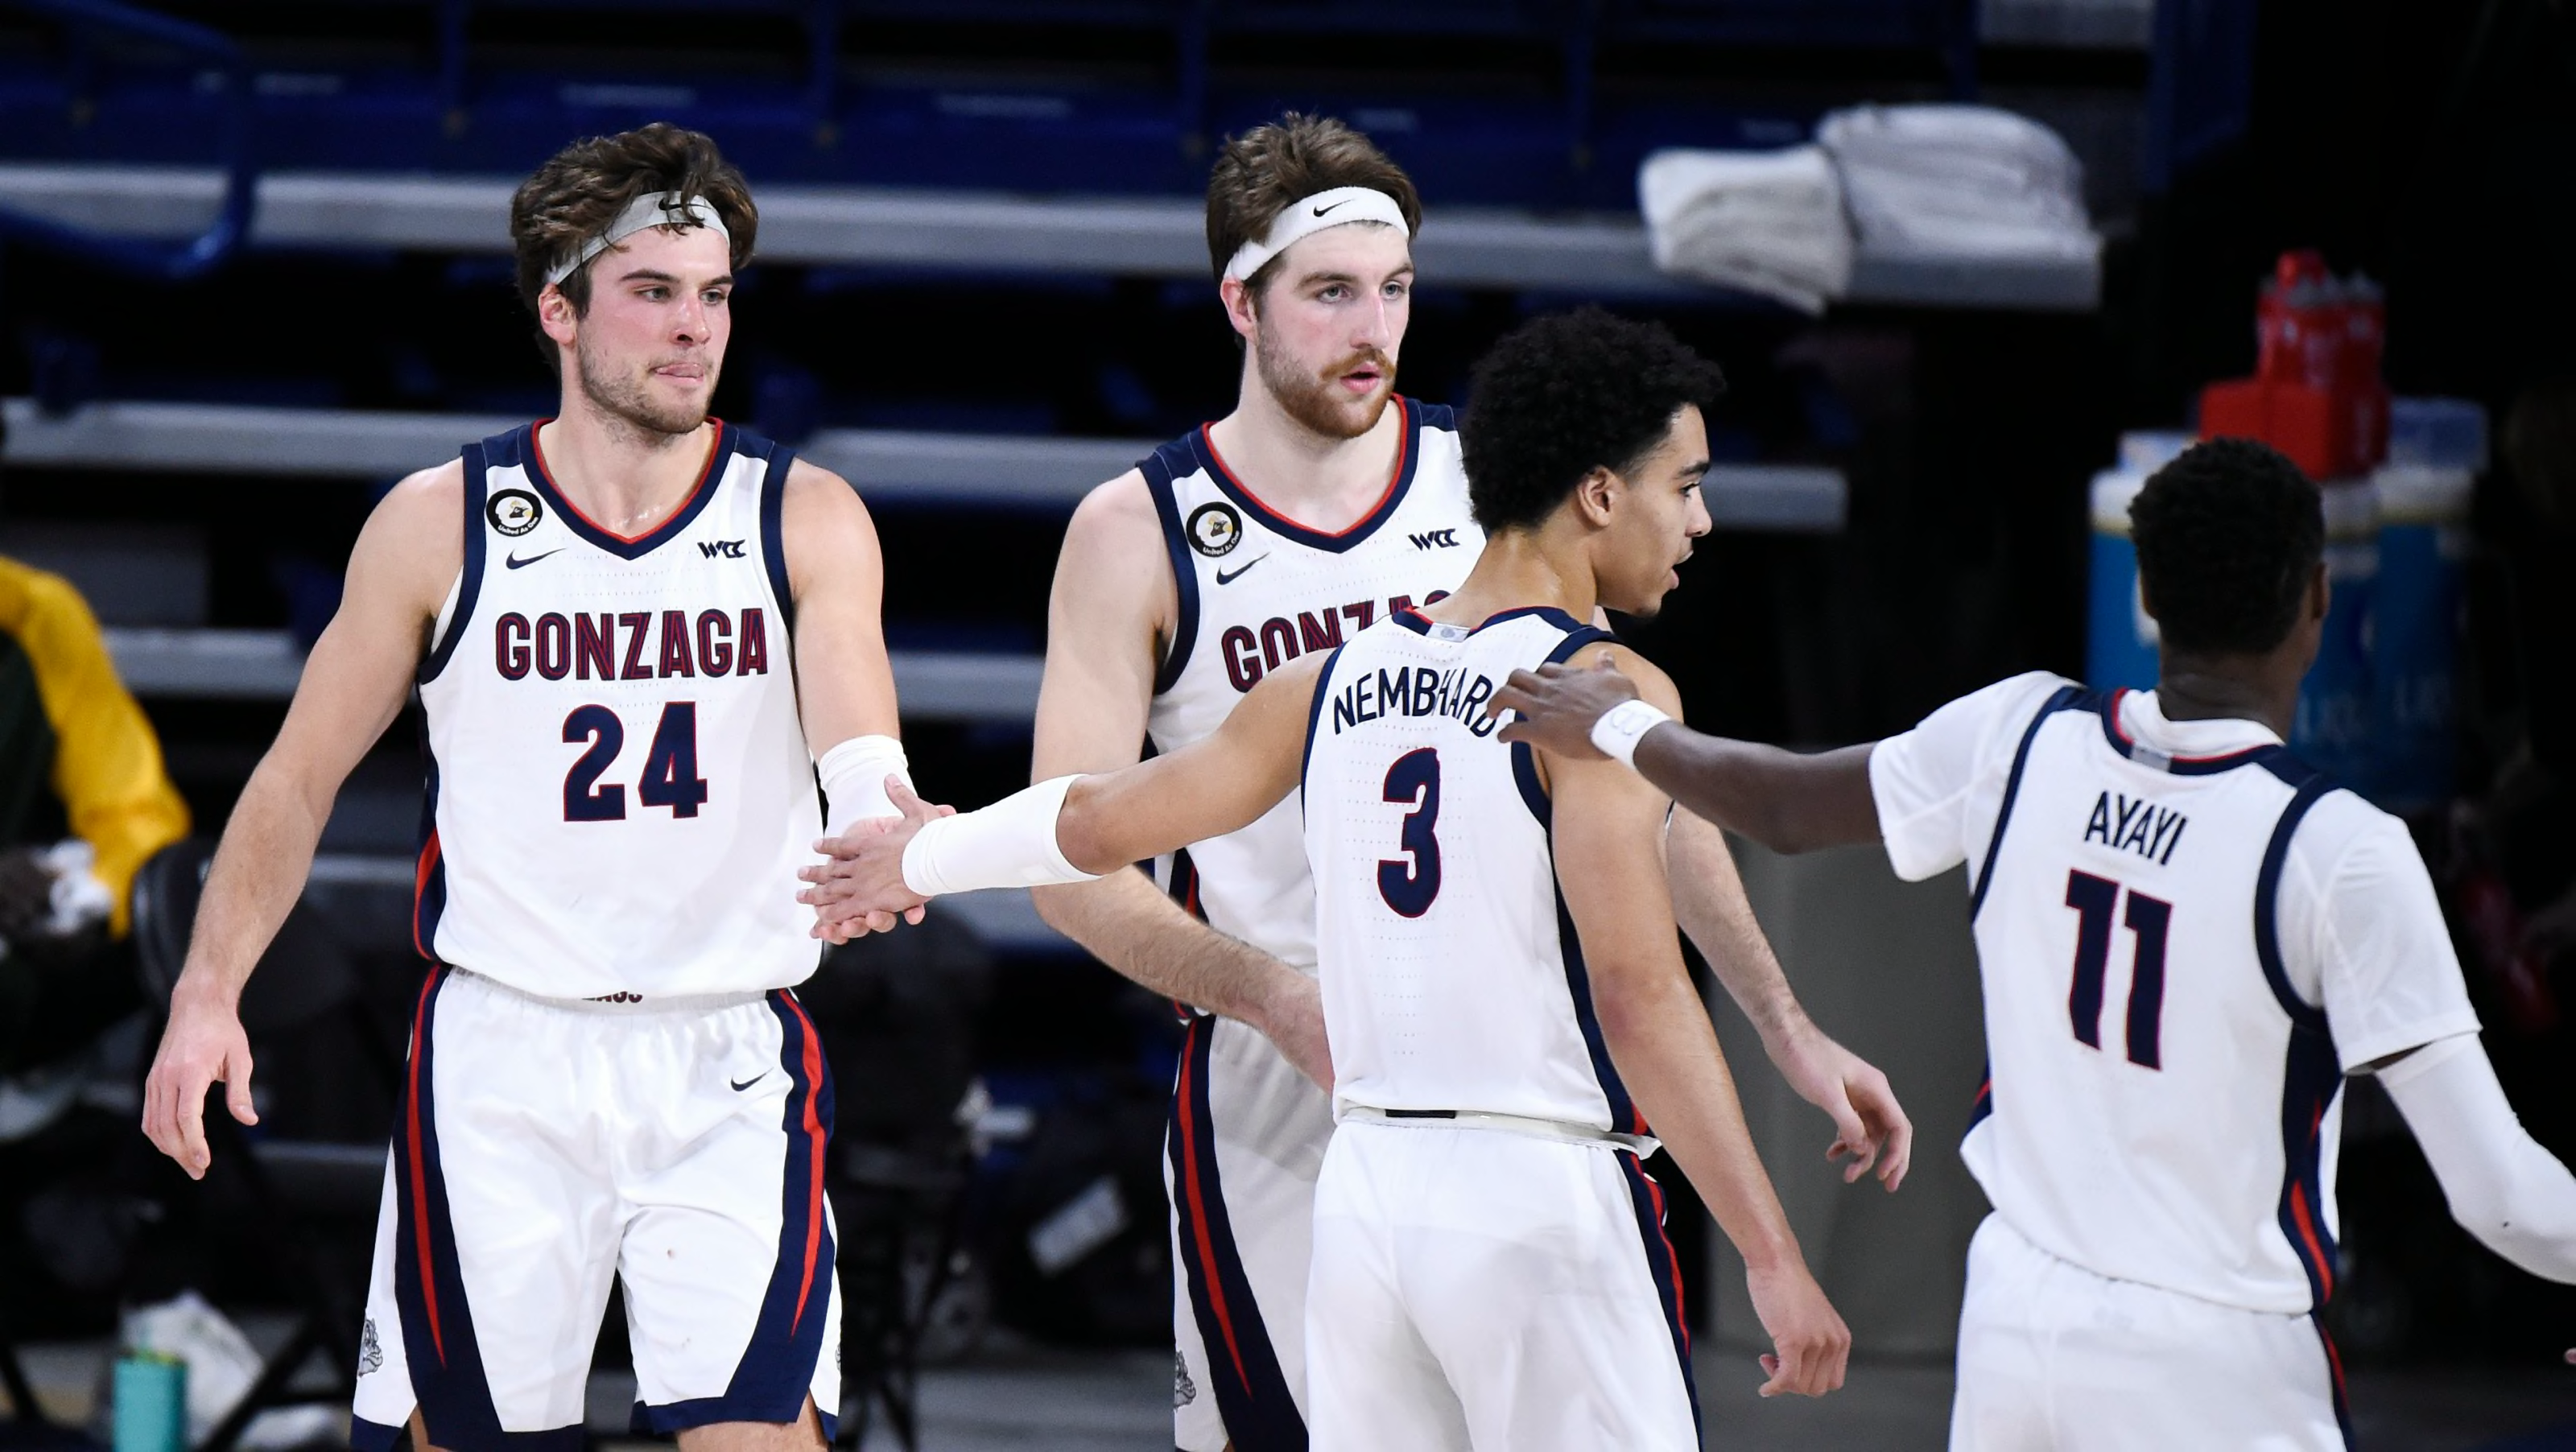 WCC Basketball BYU, Pacific rises in latest 202021 power rankings